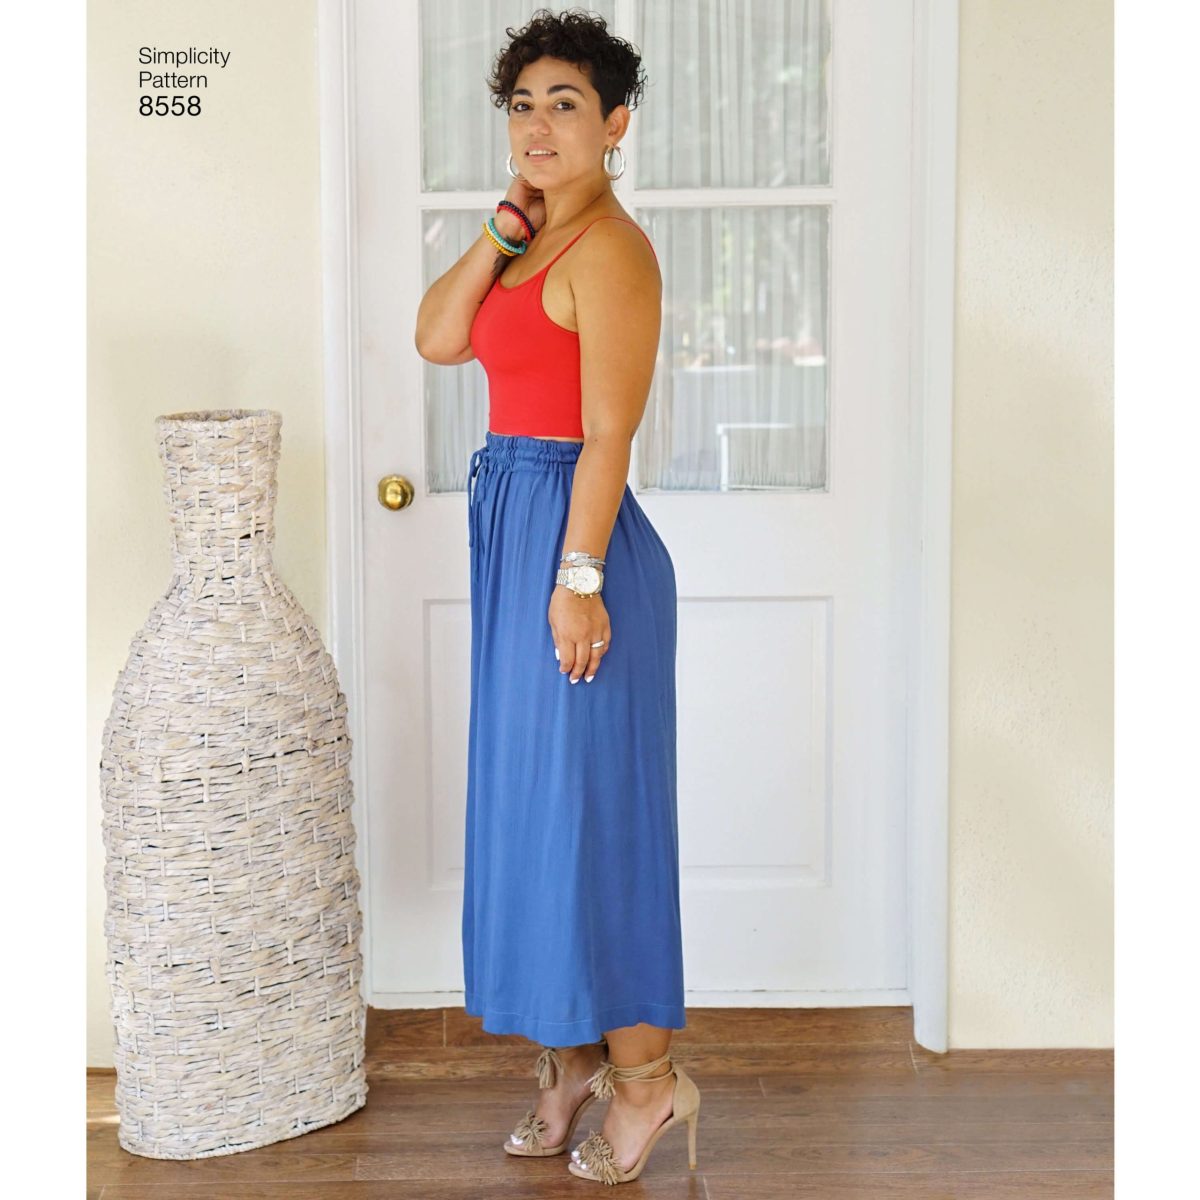 Simplicity Pattern 8558 Misses' Coordinates by Mimi G Style